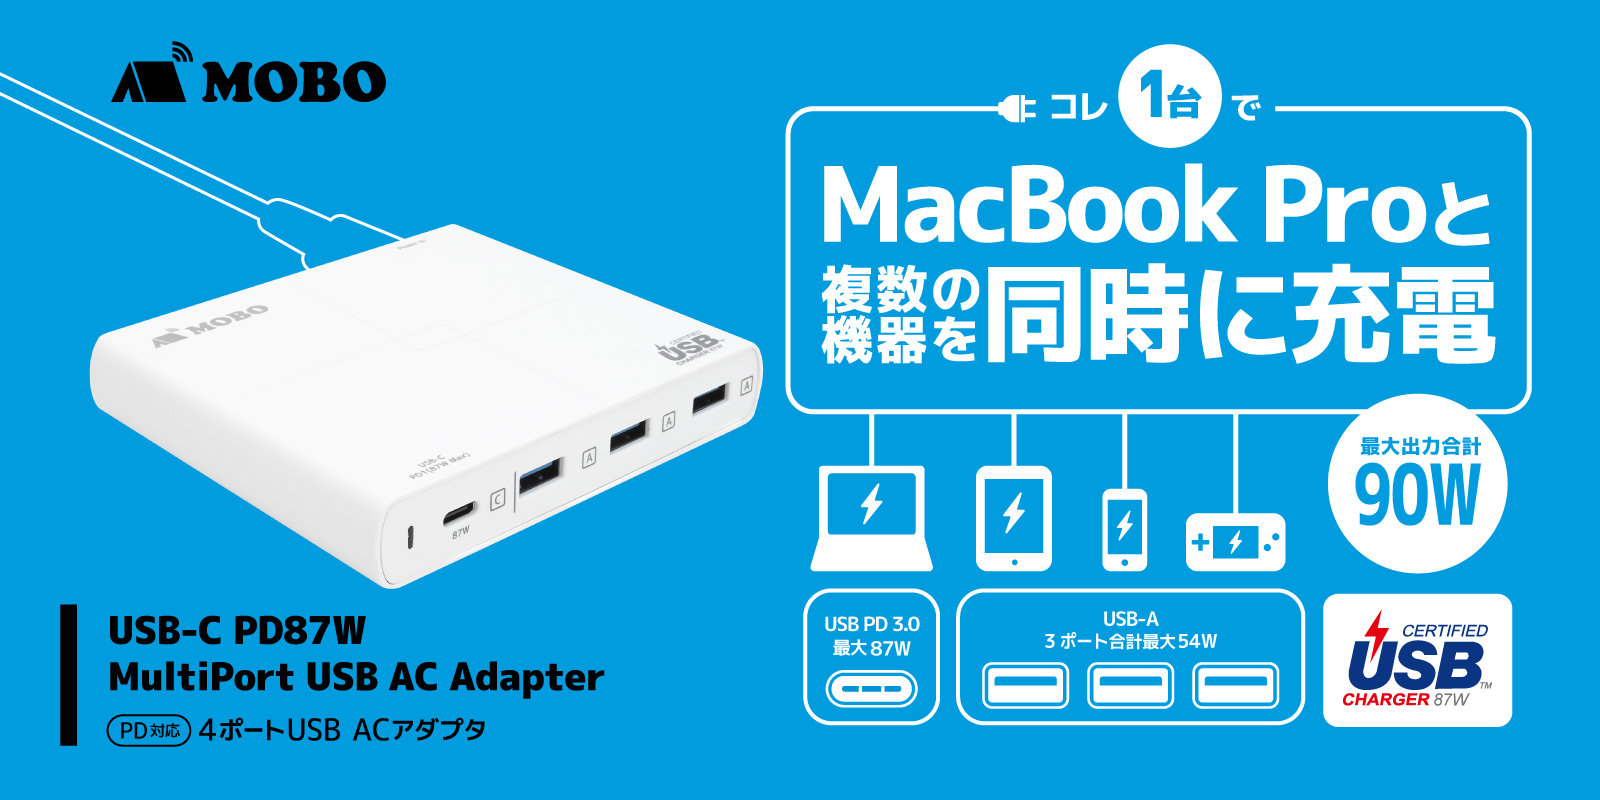 USB-C PD87W MultiPort USB AC Adapter | MOBO